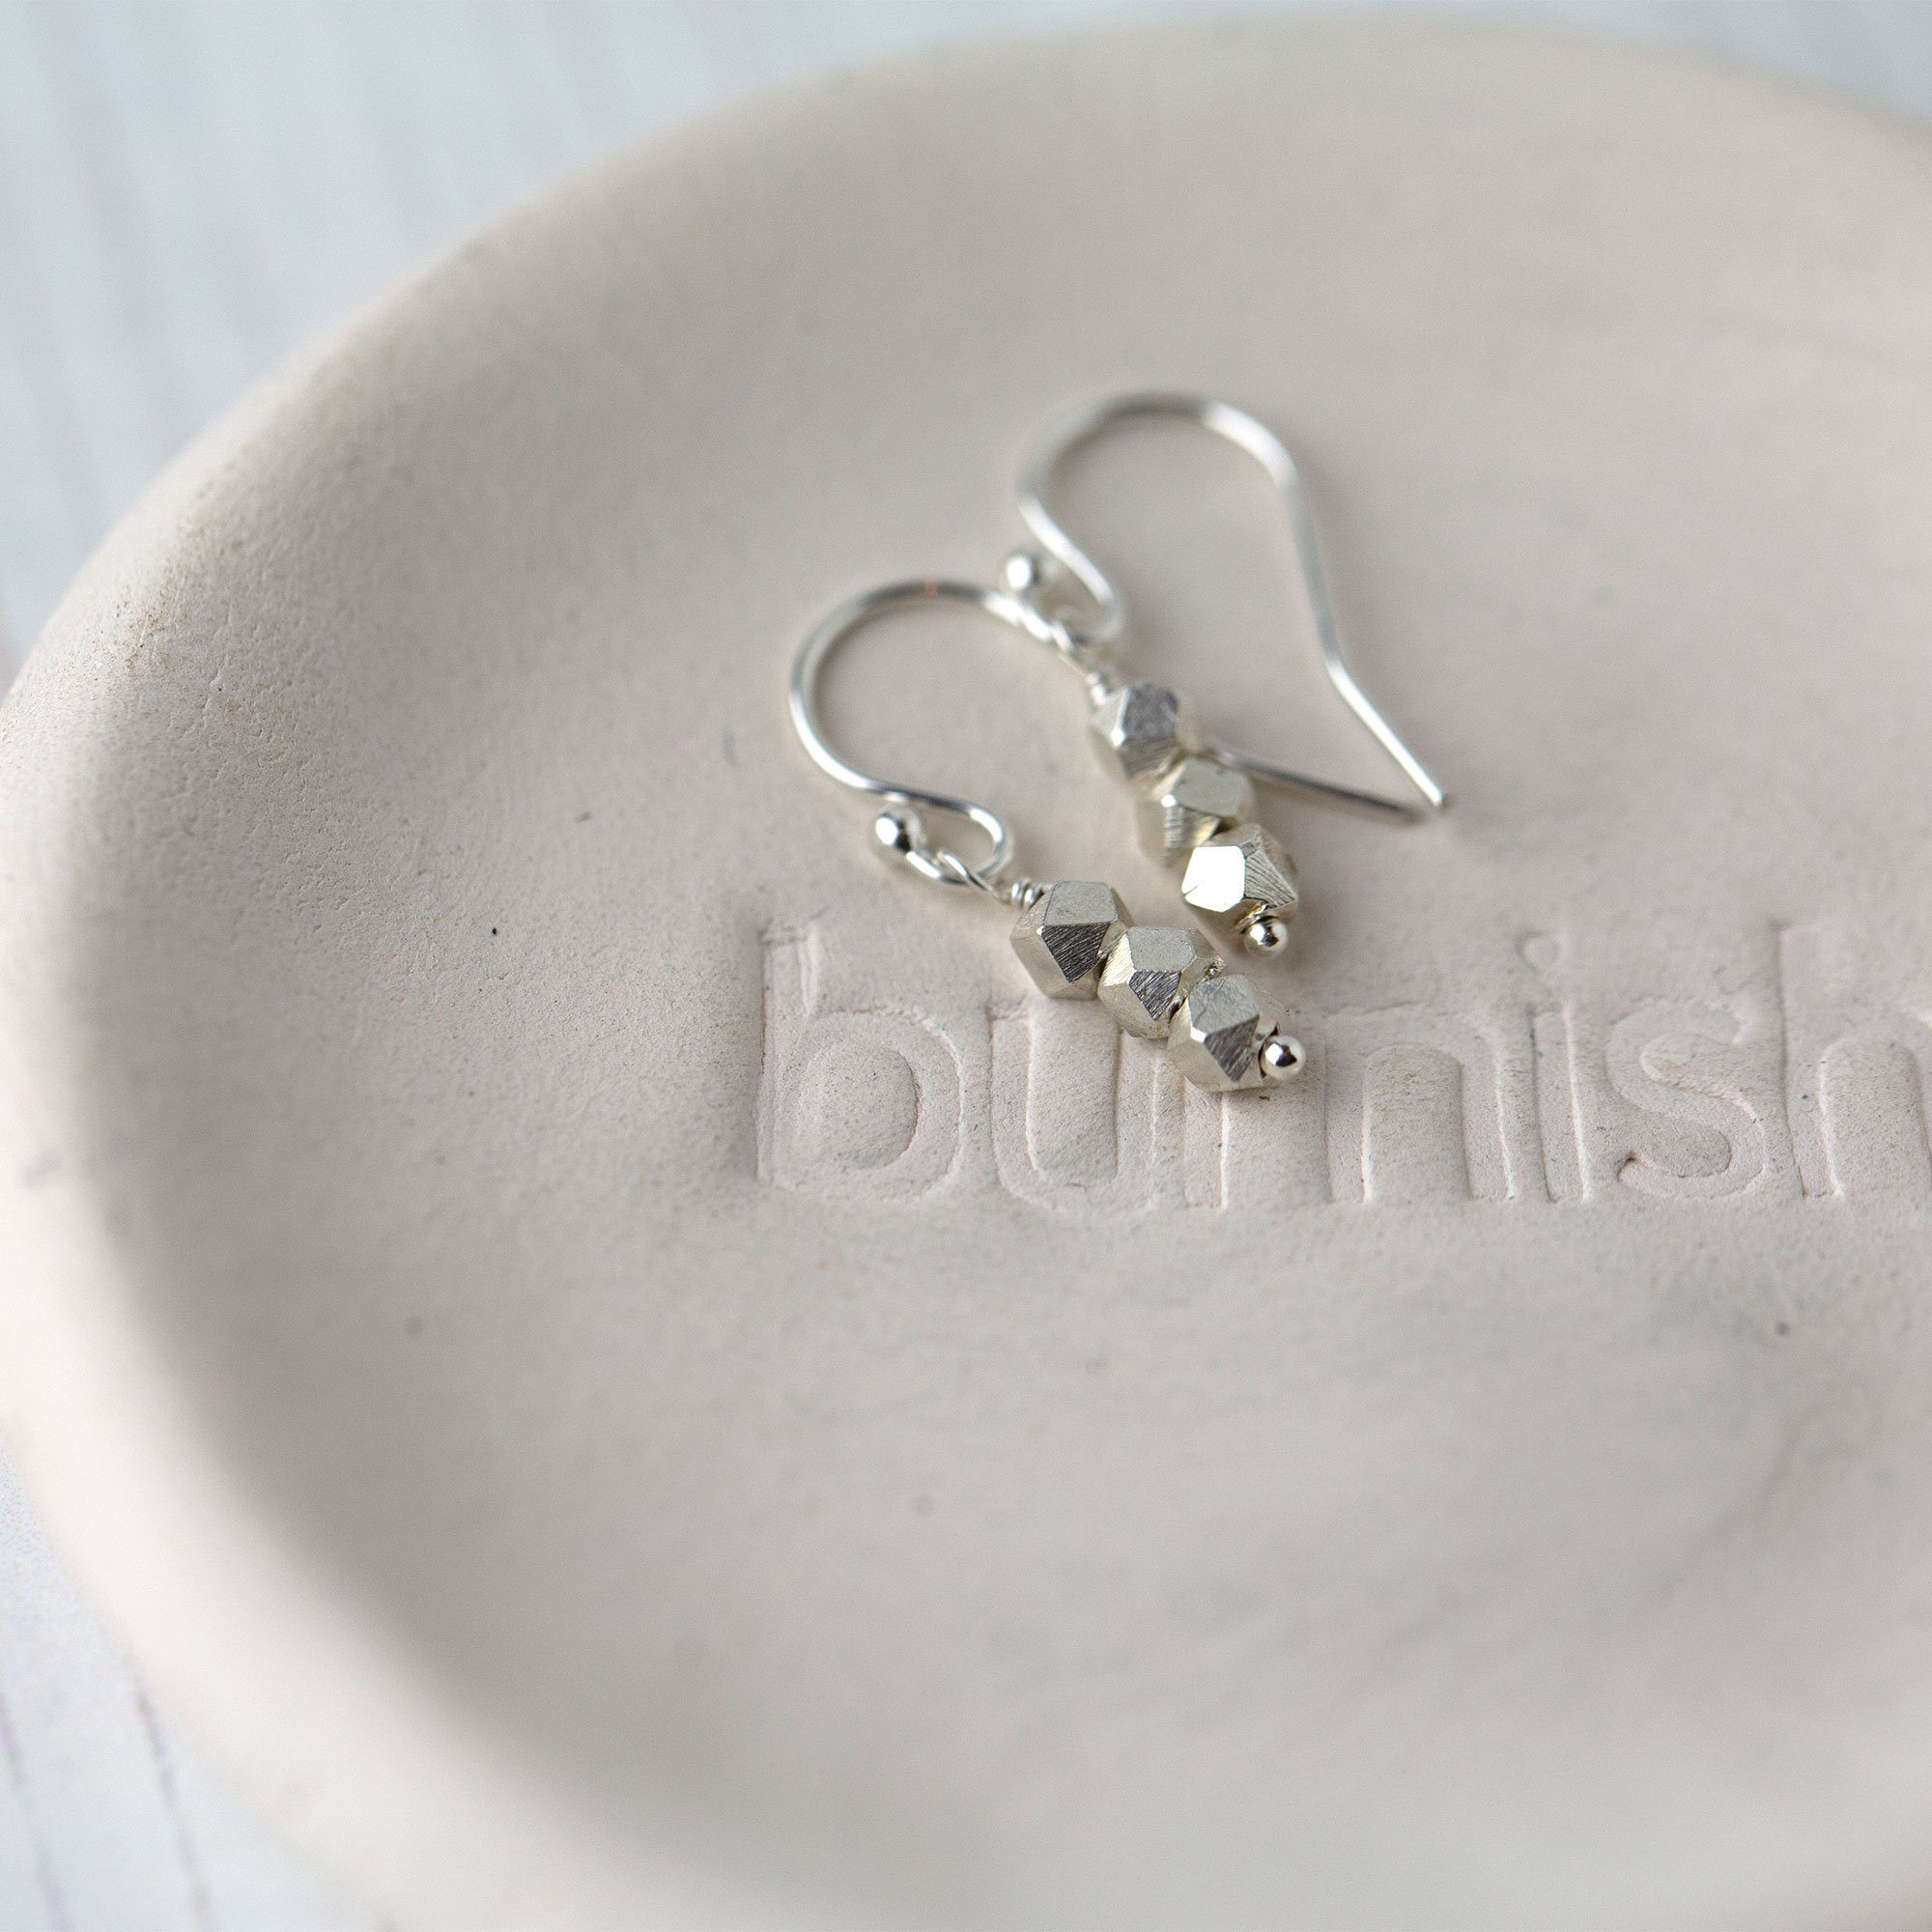 Silver Nugget Trio Earrings - Handmade Jewelry by Burnish